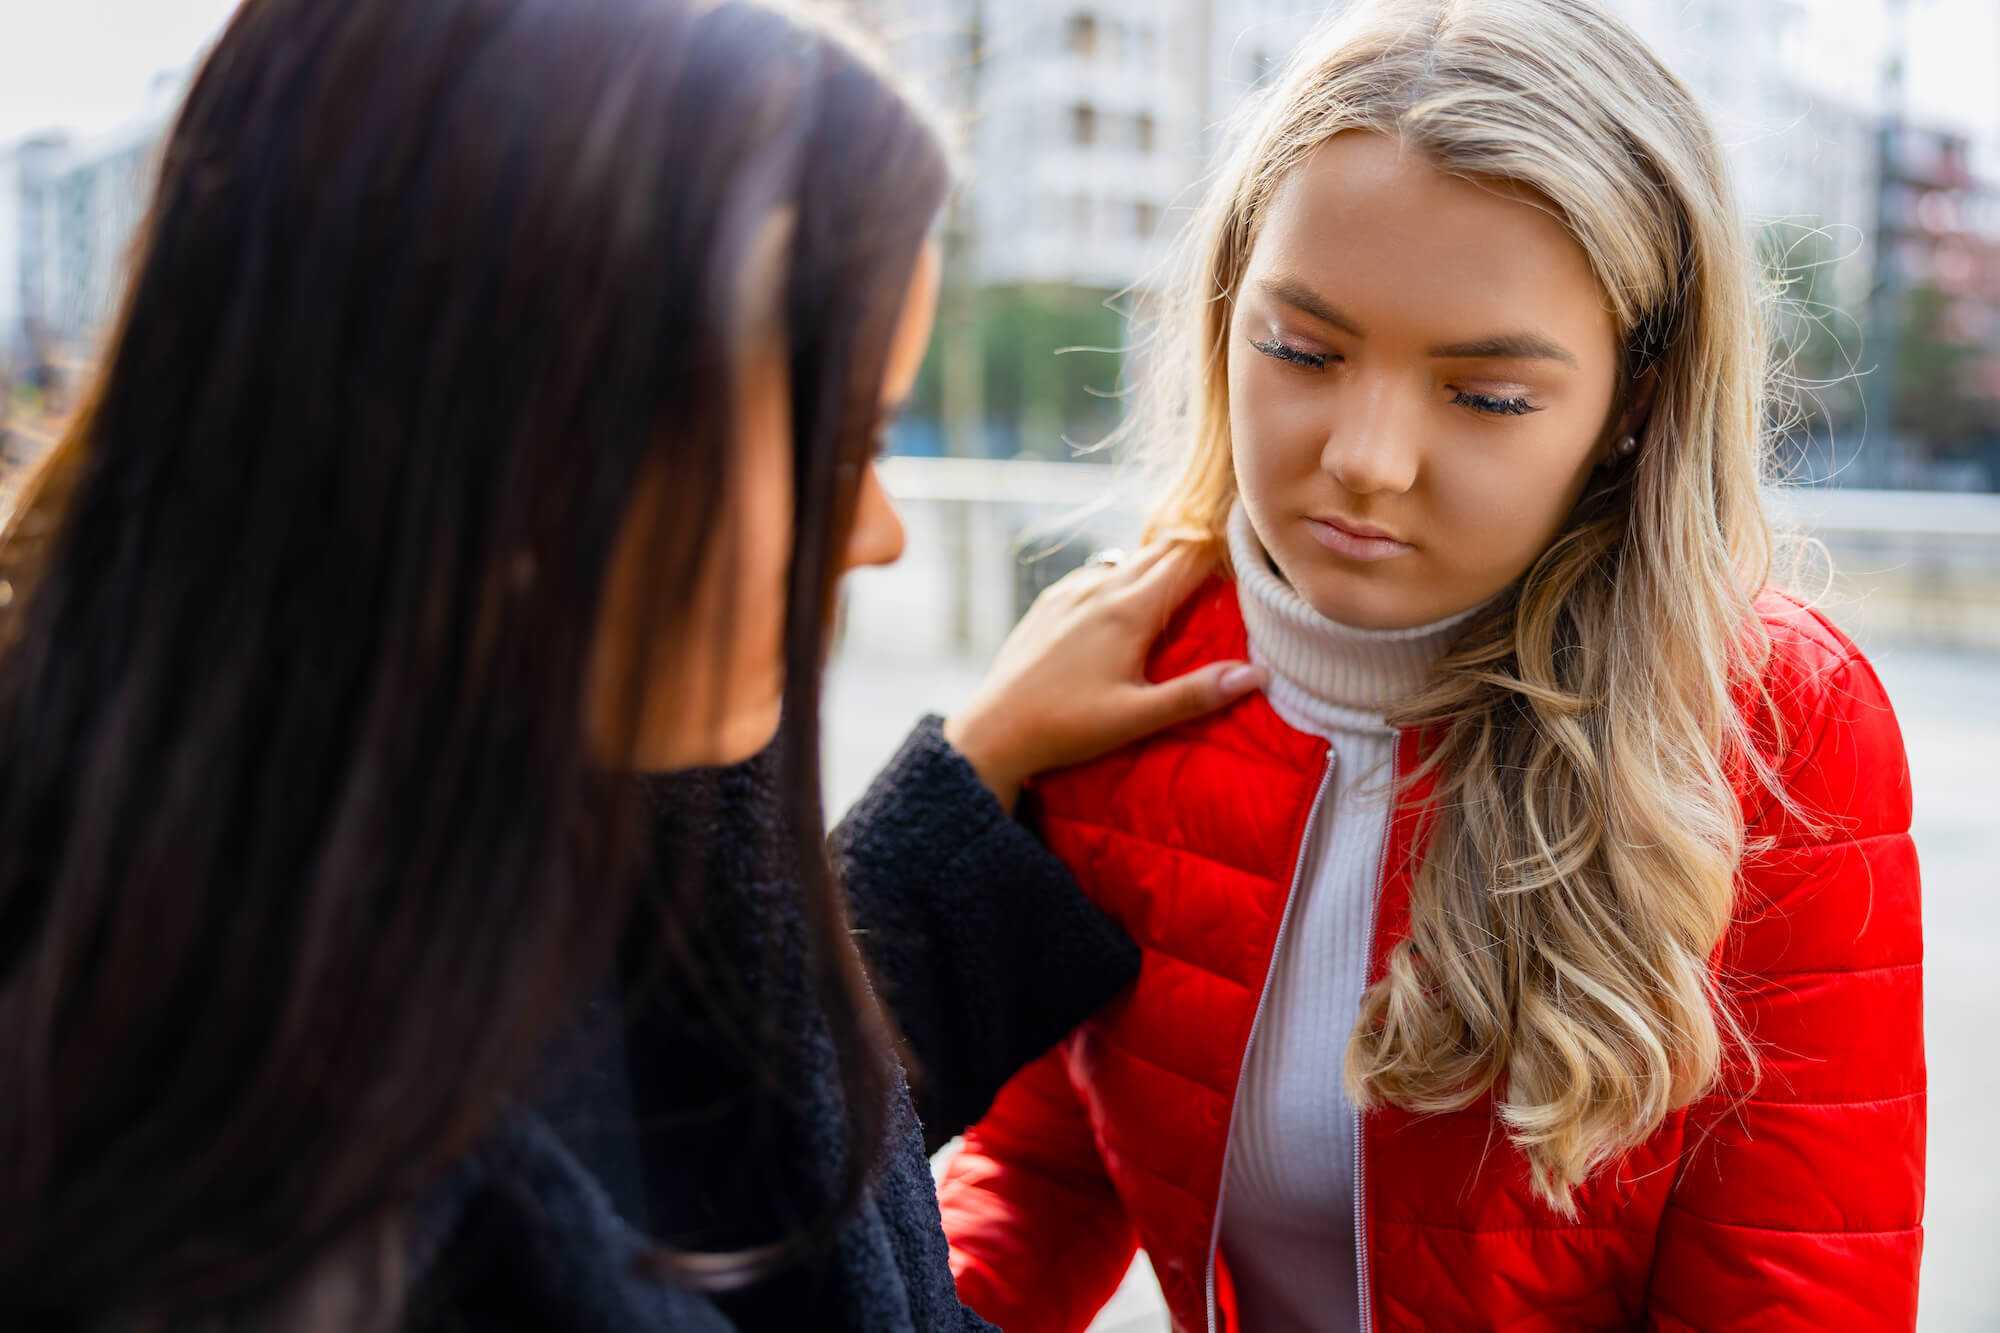 A woman consoles a young girl in a red coat and white turtle neck.